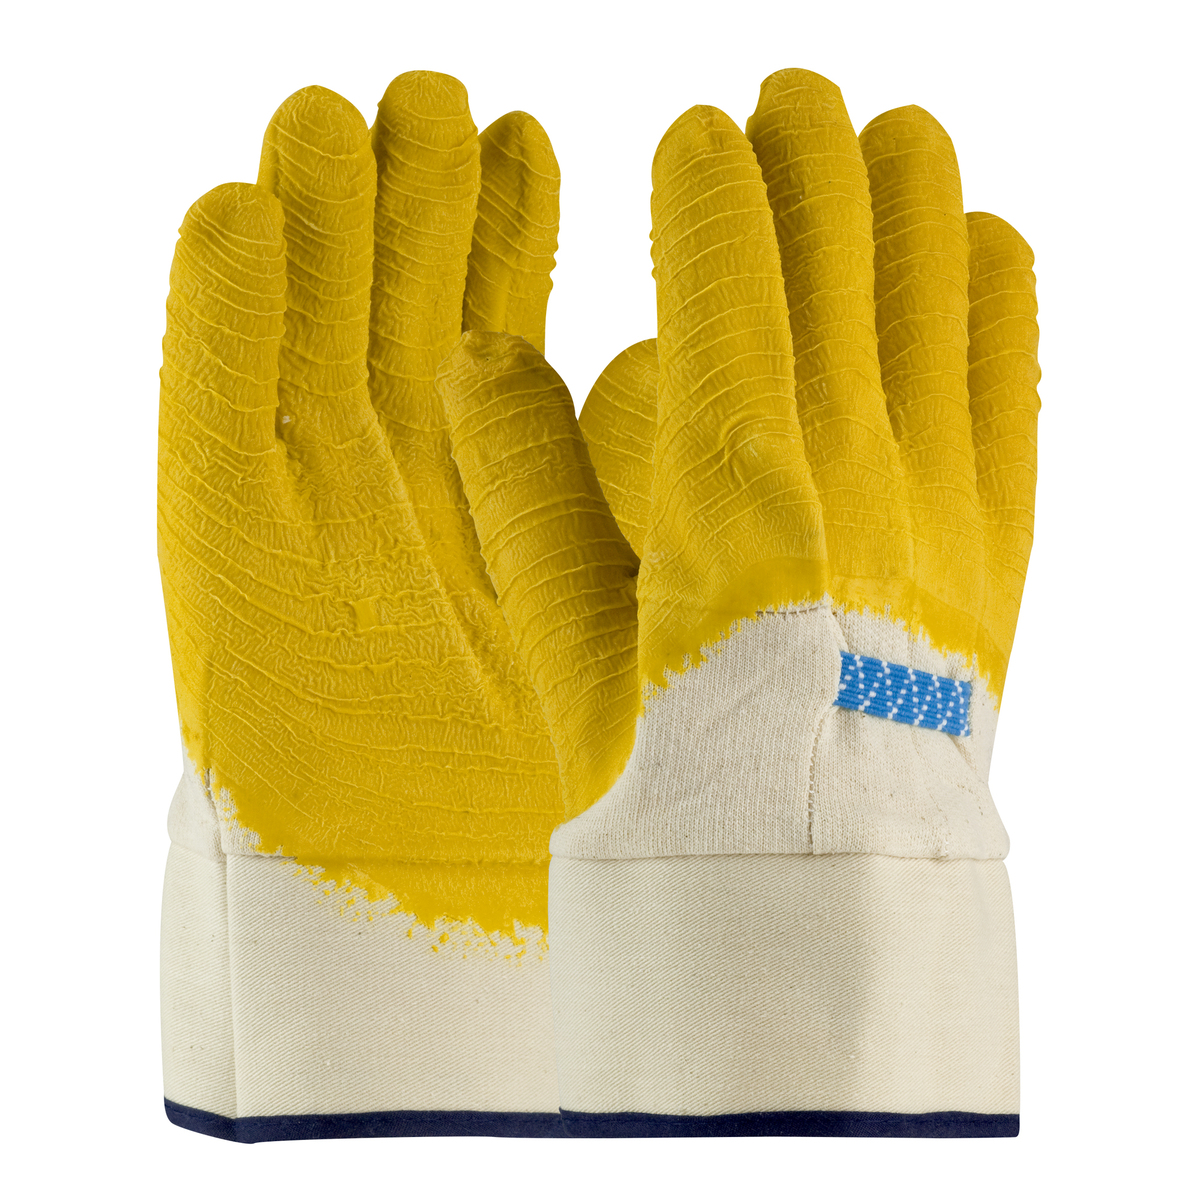 PIP® Large Armor® 10 Gauge Yellow Latex Palm, Finger And Knuckles Coated Work Gloves With Cotton Liner And Safety Cuff